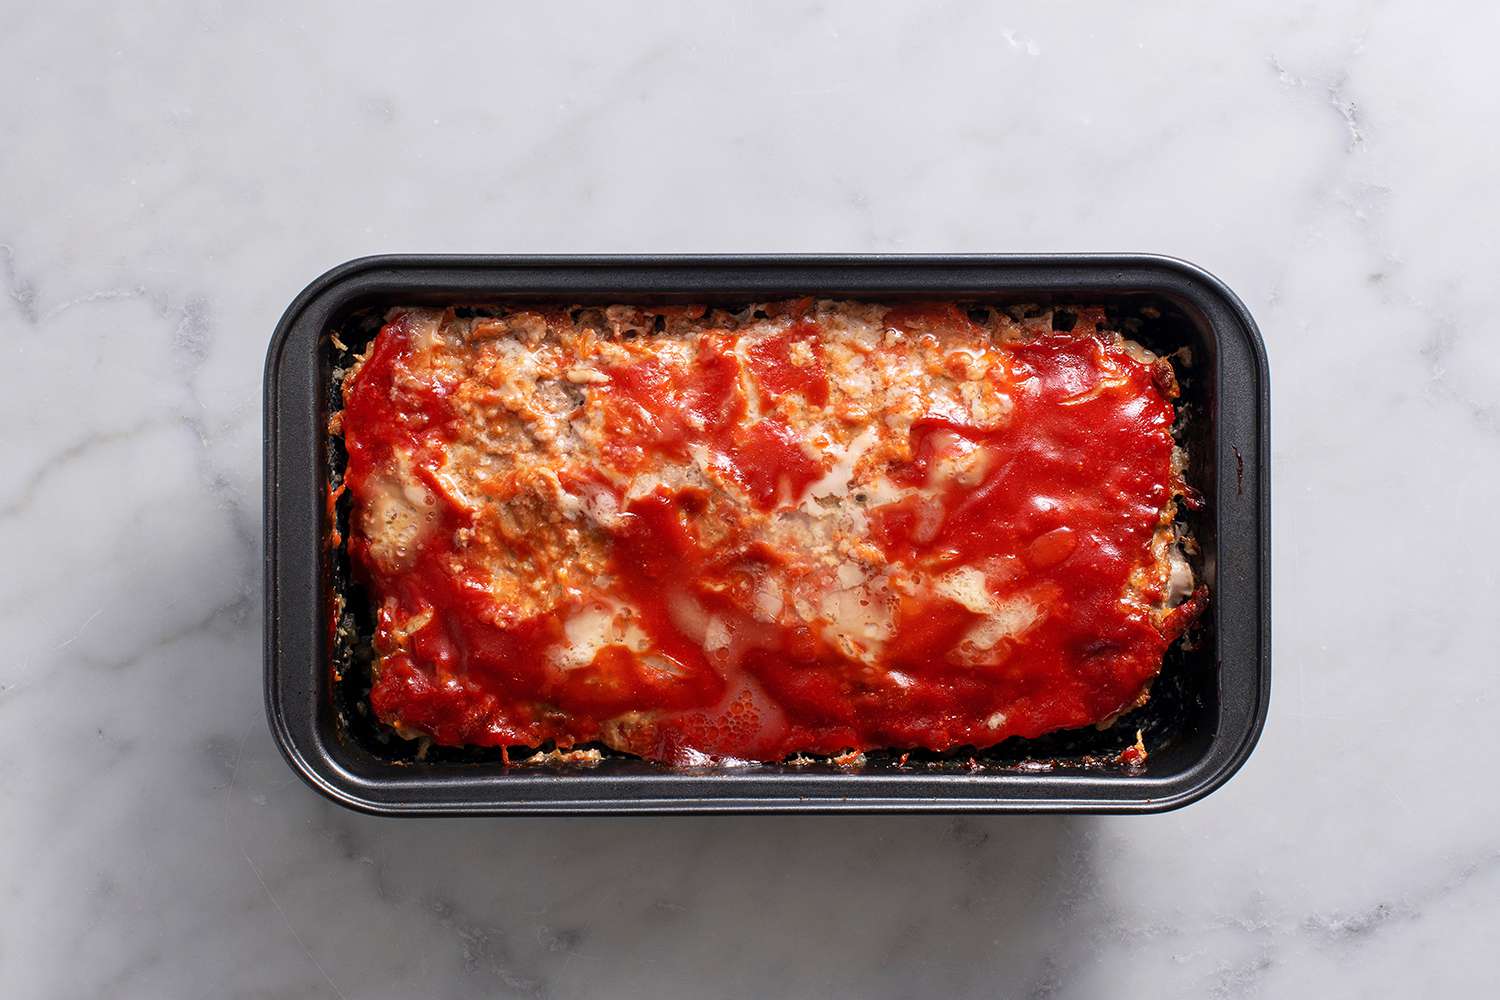 Baked meatloaf with lightly browned top, pulling away from the sides of the loaf pan